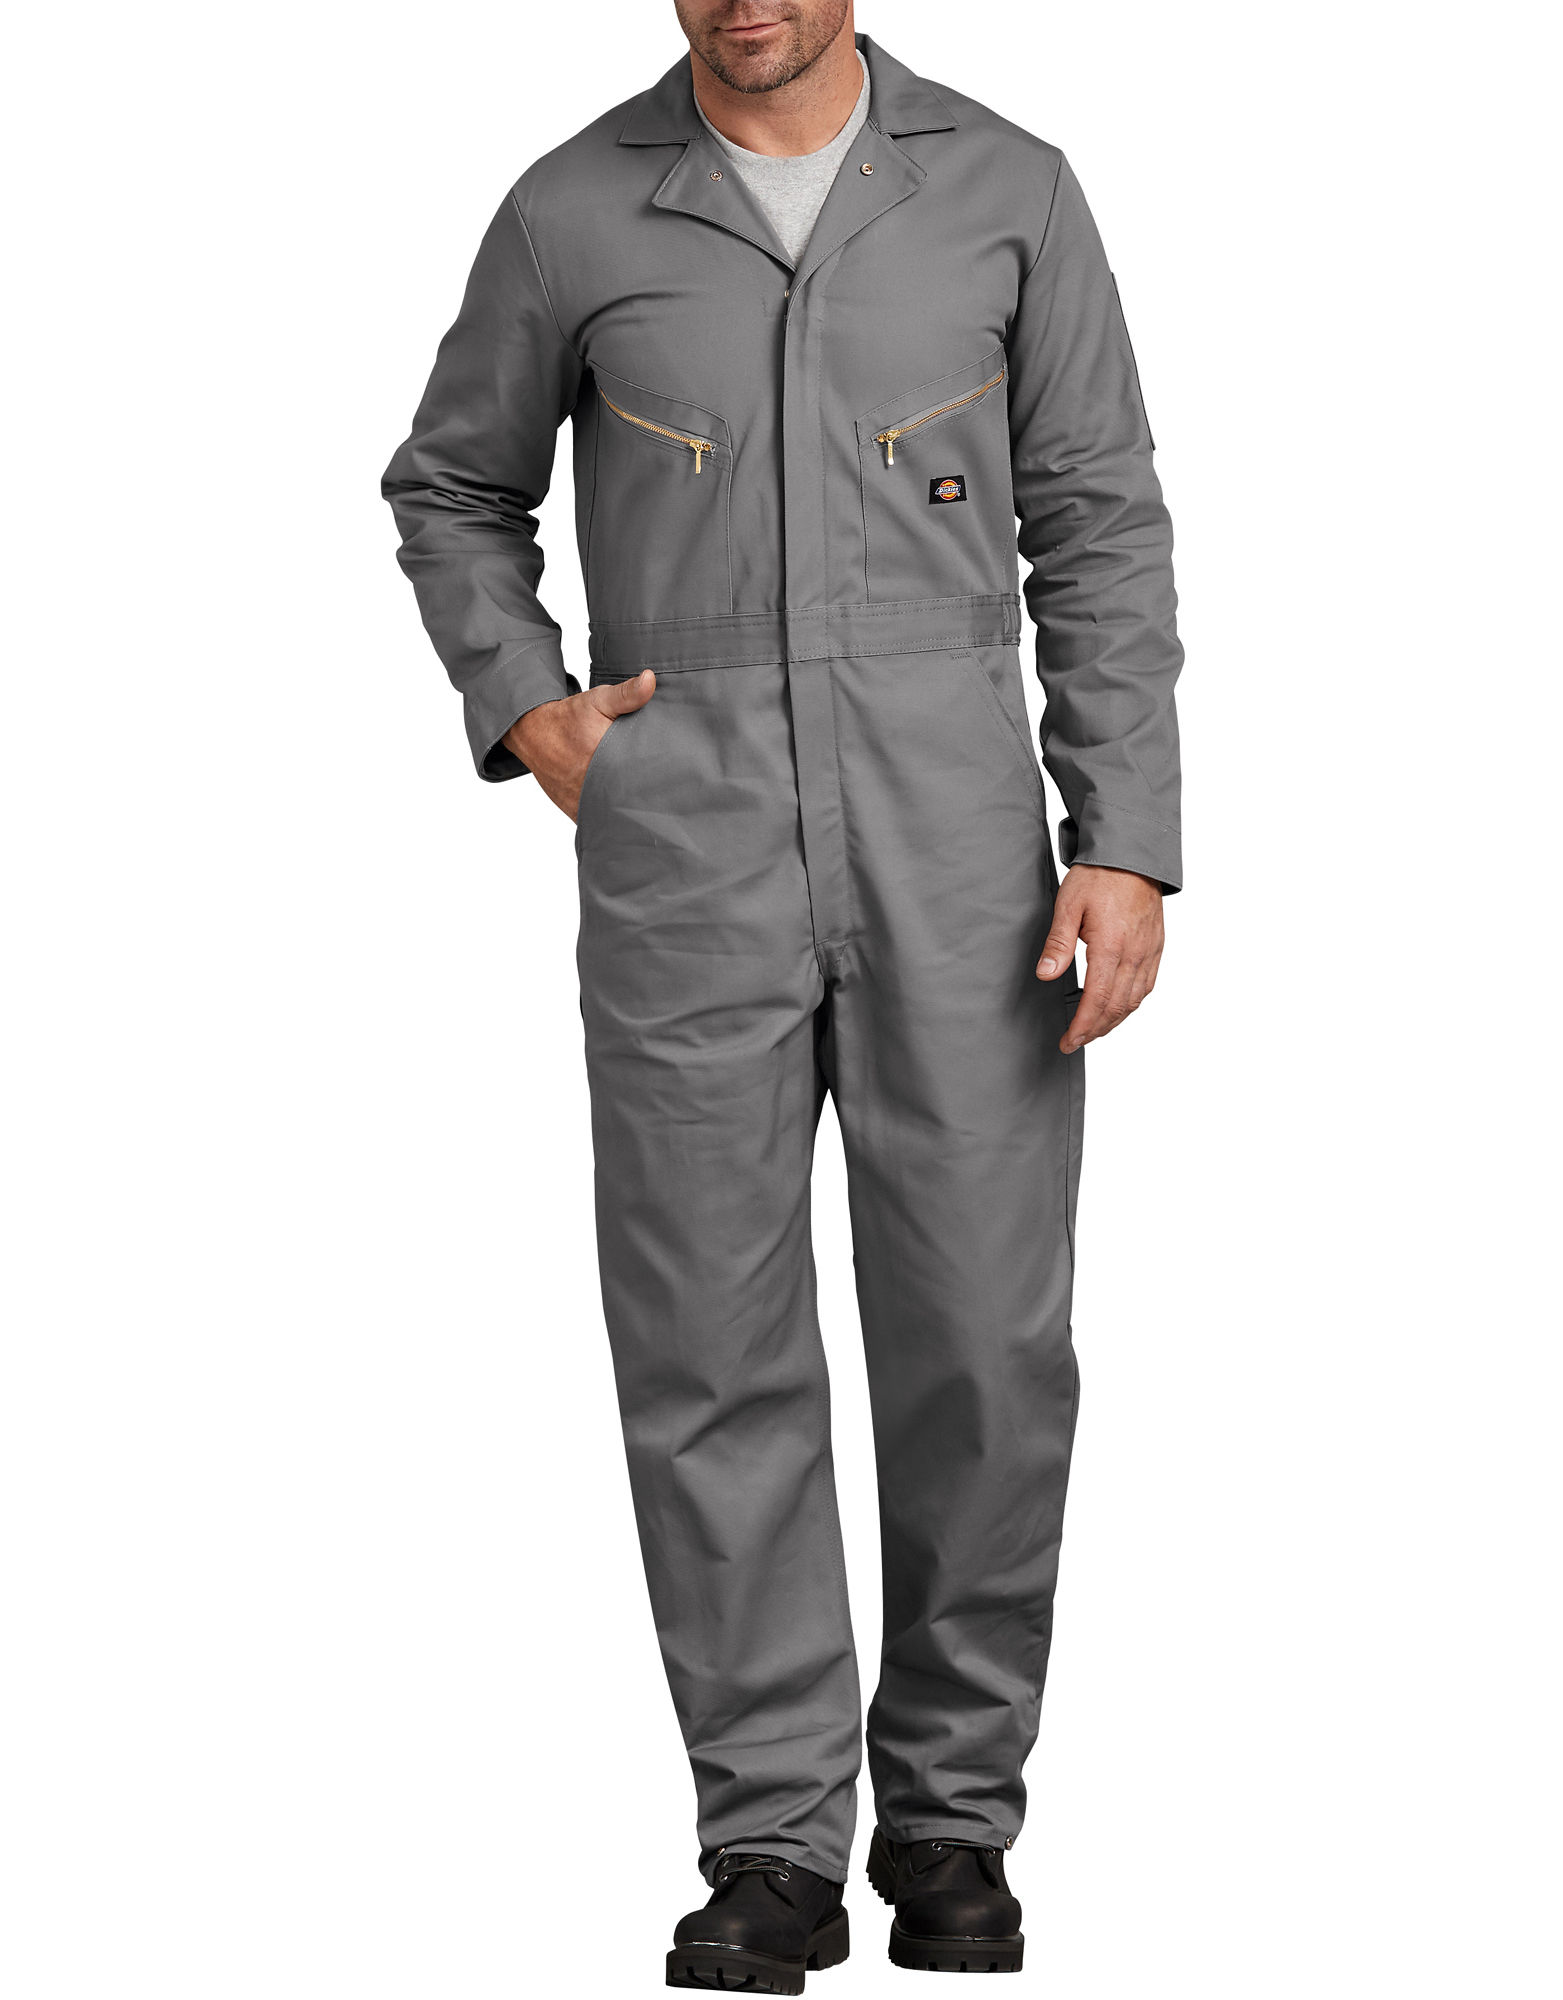 Snoly Unisex Short Sleeve Button-Front Flight Suit Action Back Jumpsuit Twill Stain & Wrinkle Resistant Work Coverall 